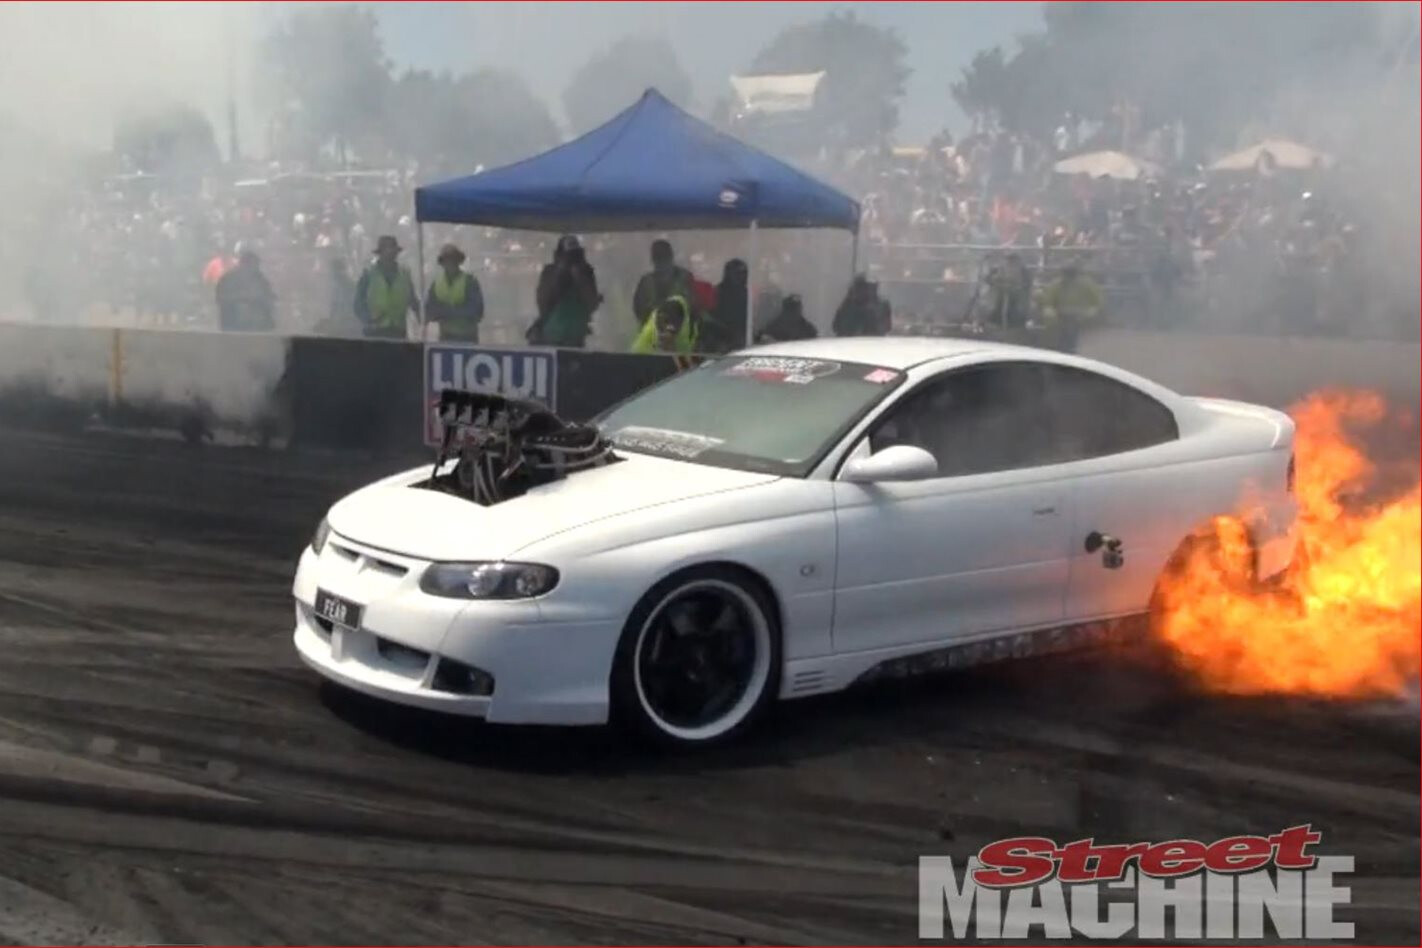 VIDEO: THROW ANOTHER BLOWER ON THE BARBY